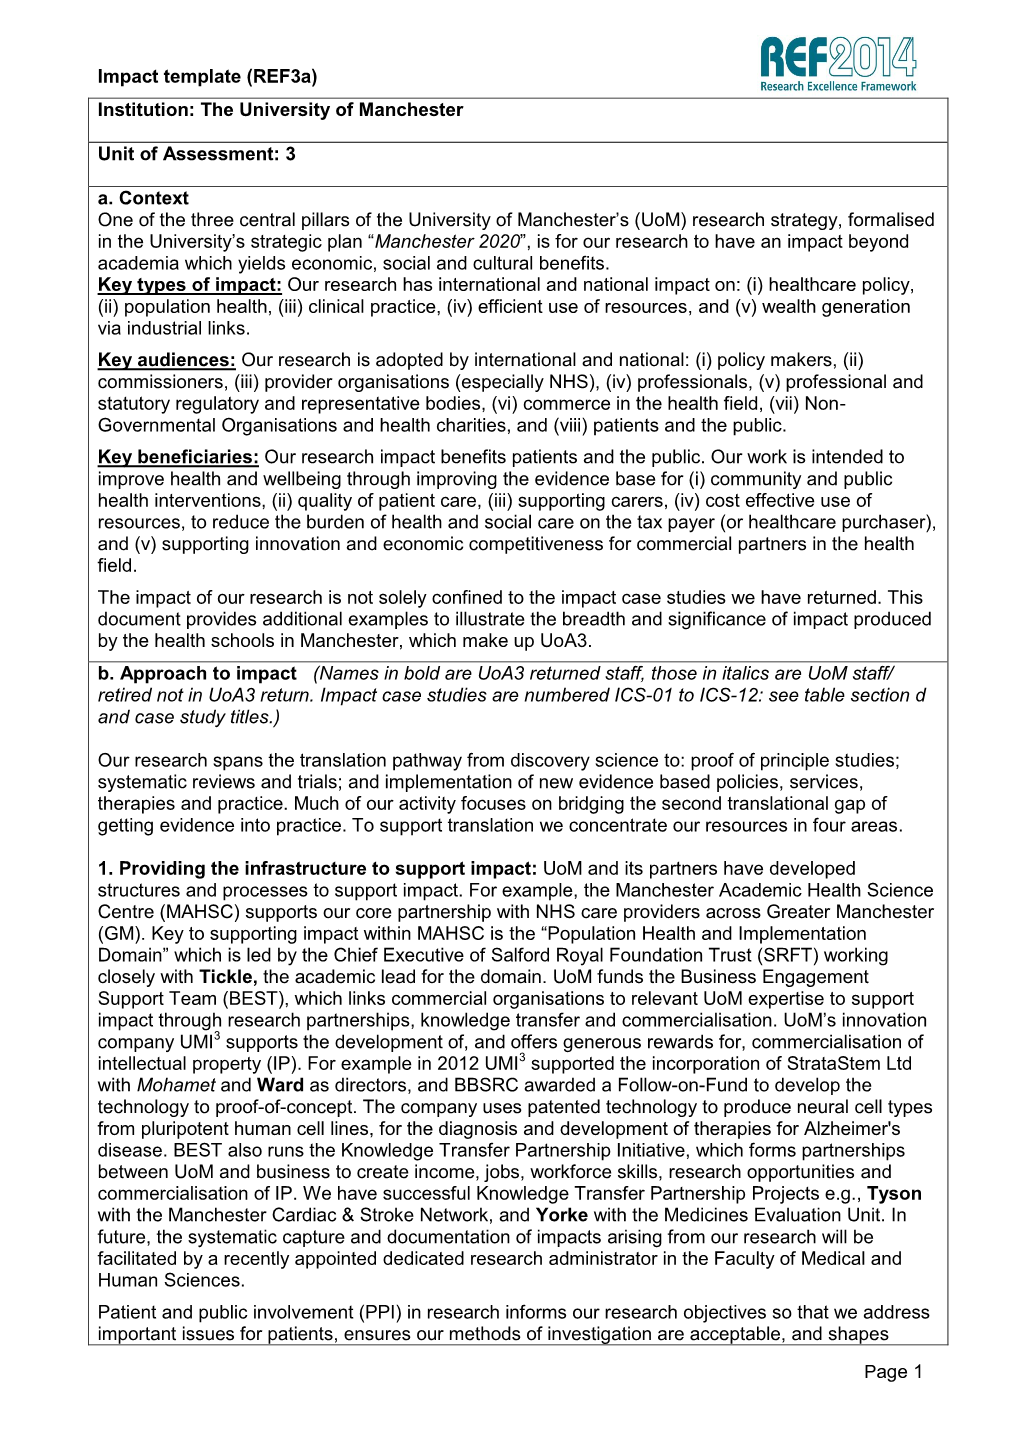 Impact Template (Ref3a) Page 1 Institution